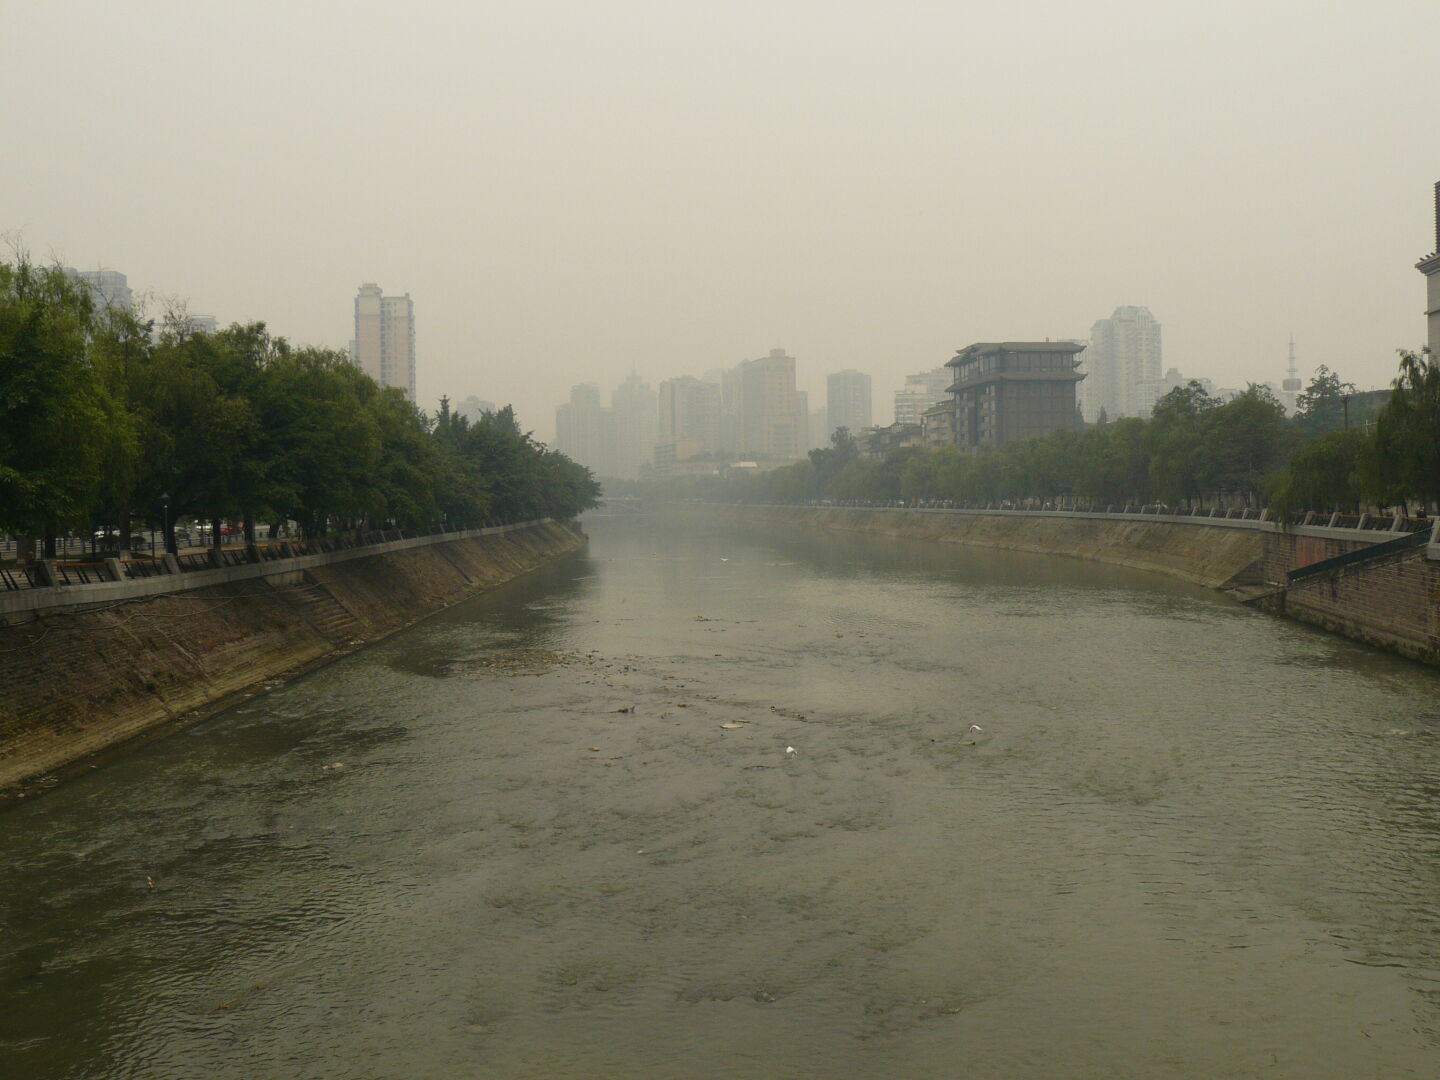 This is the Jinjiang River, which was described as wonderful and beautiful on one of the few English signs... that must have been in a different universe.